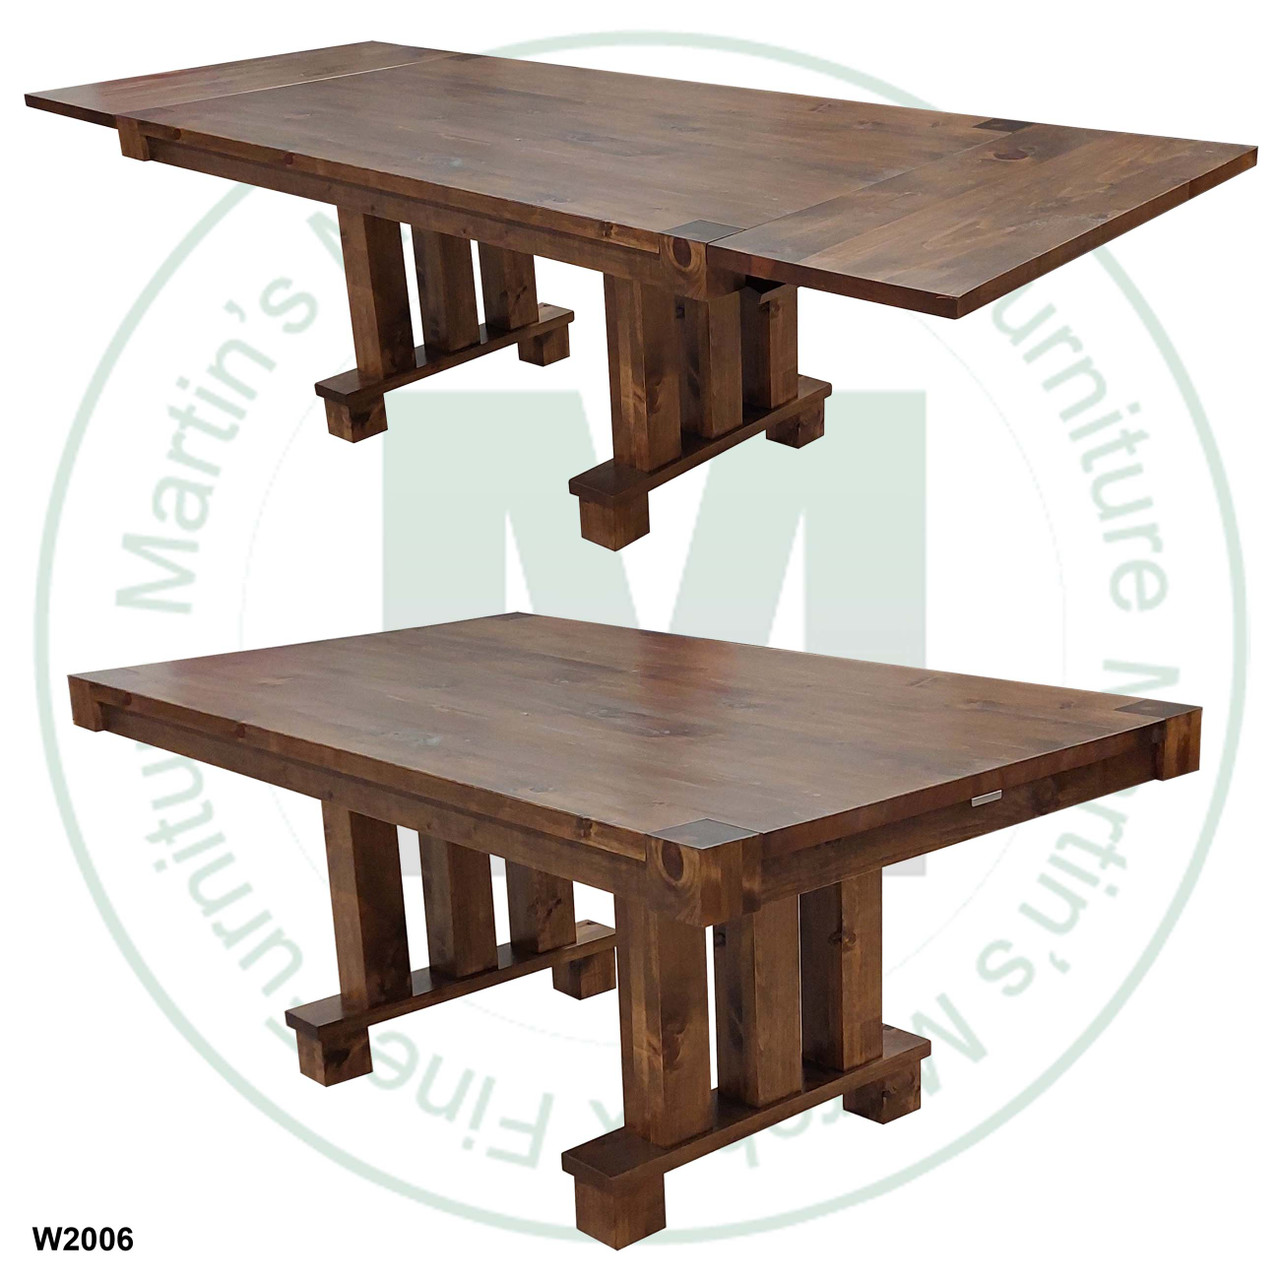 Maple Backwoods Solid Top Pedestal Table 36''D x 60''W x 30''H With 2 - 18'' Leaves